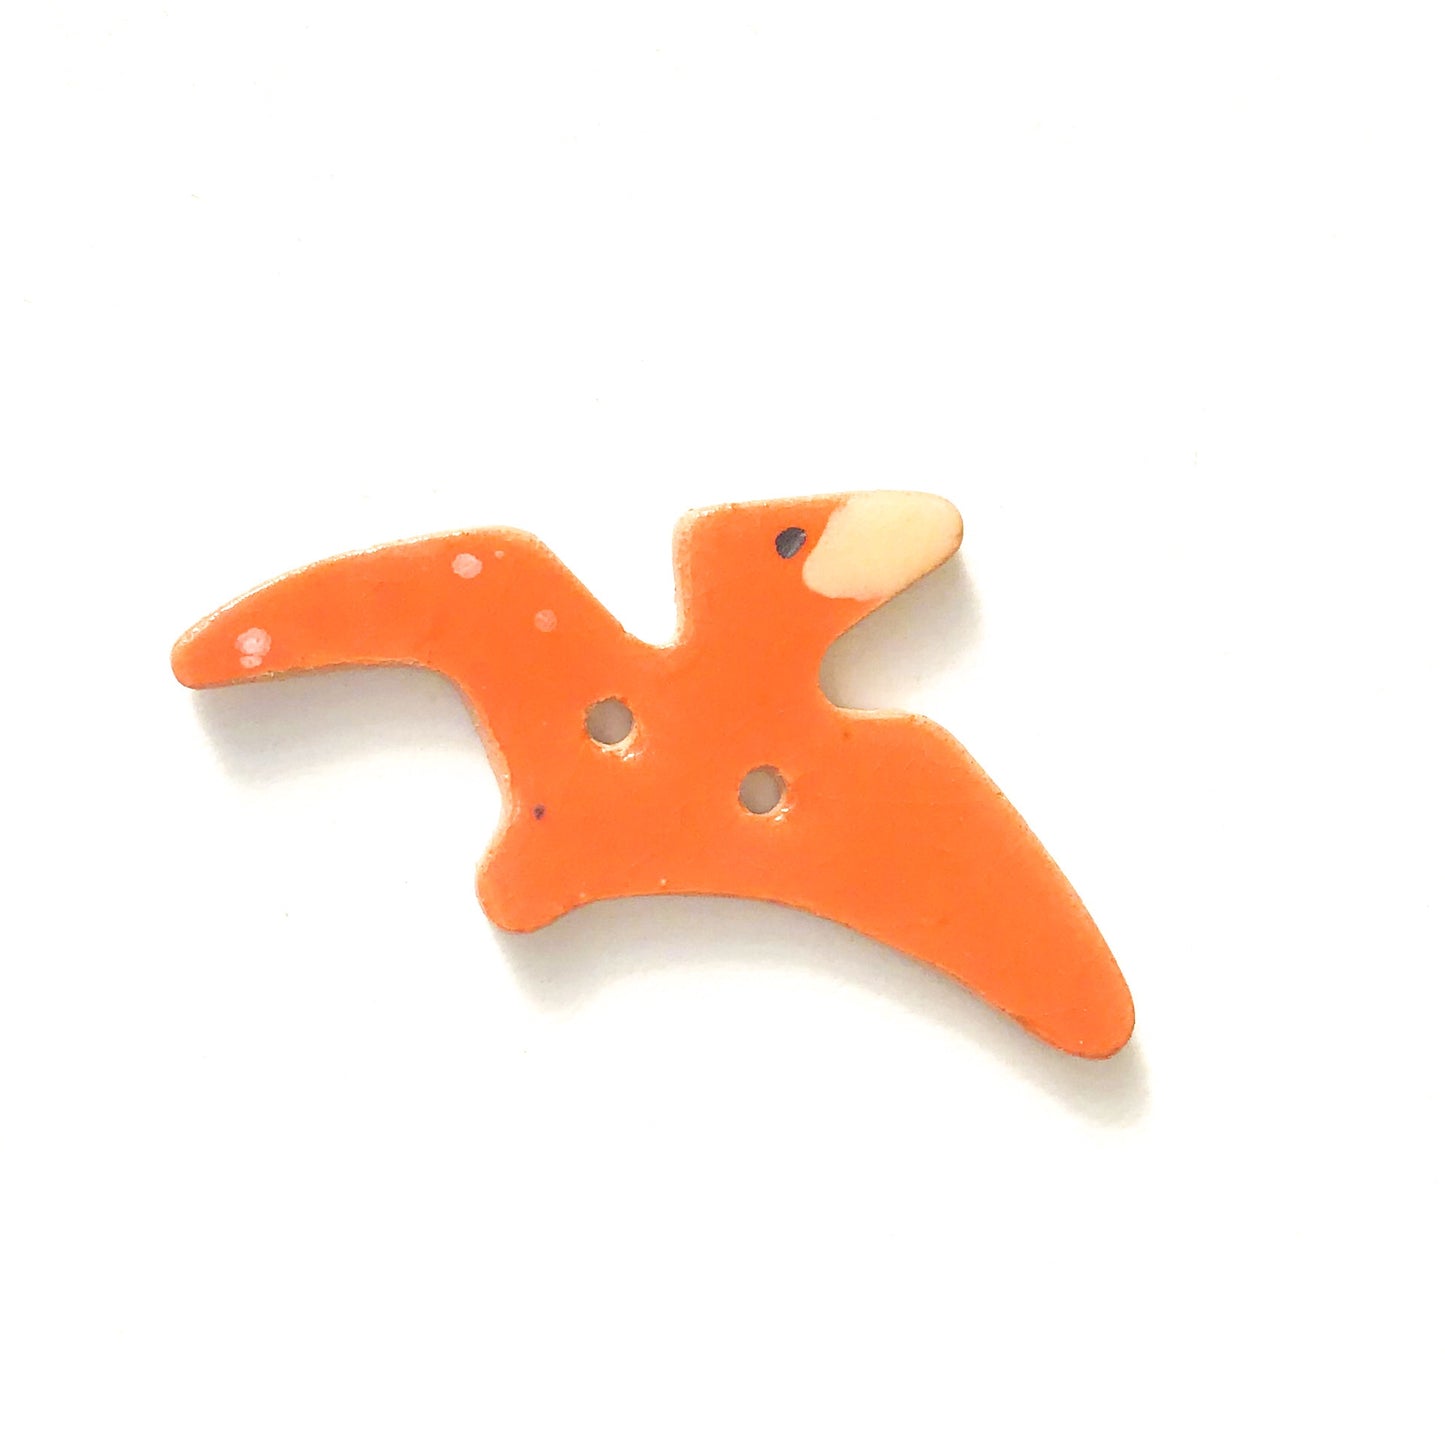 Pterodactyl Buttons - Ceramic Dinosaur Buttons - Children's Animal Buttons (ws-163)